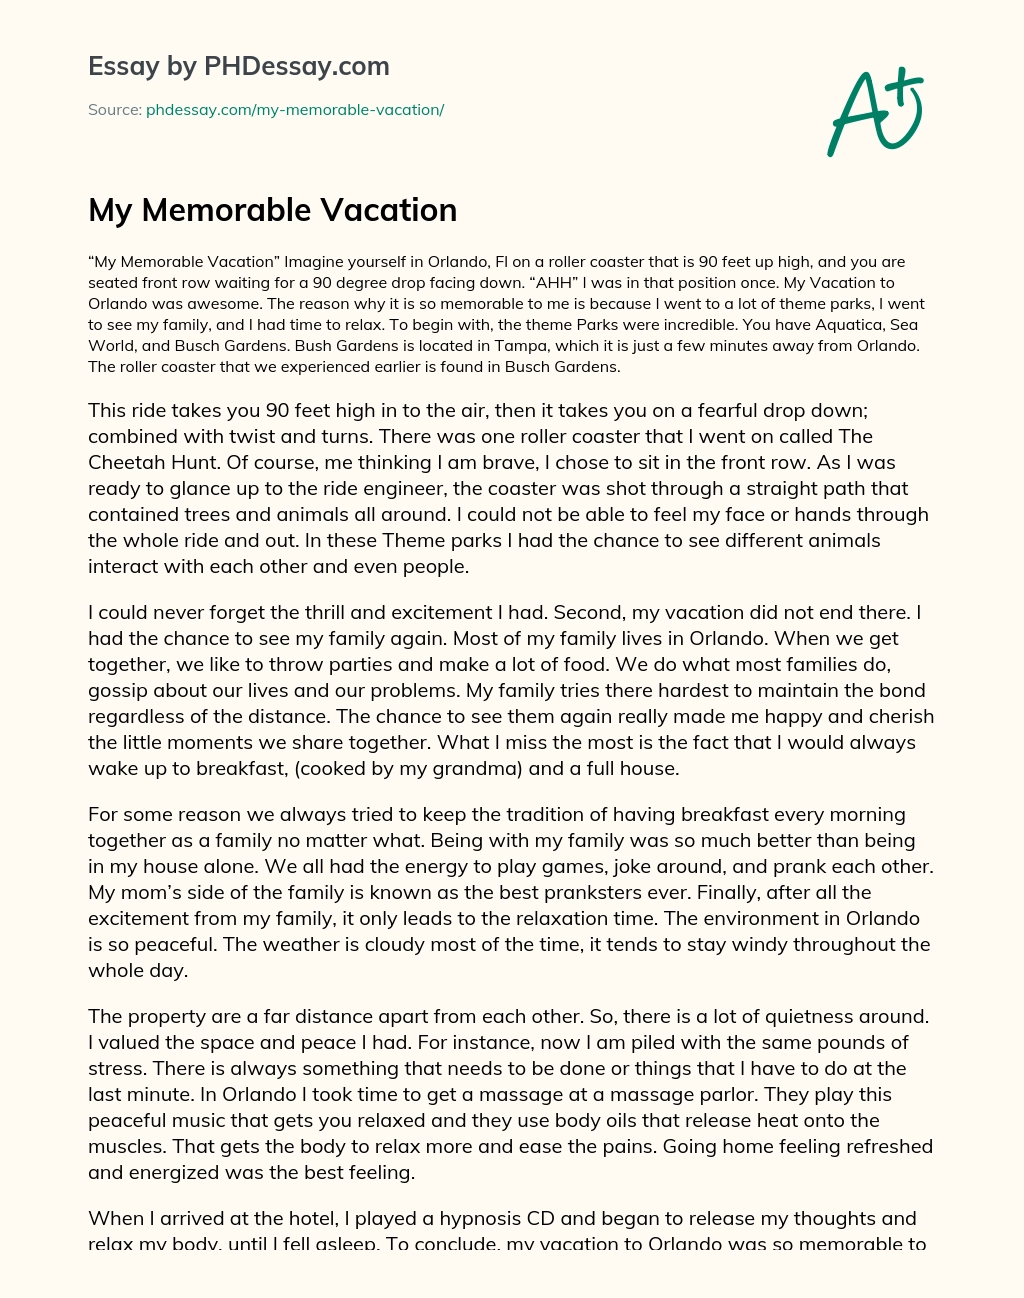 review essay the most memorable vacation